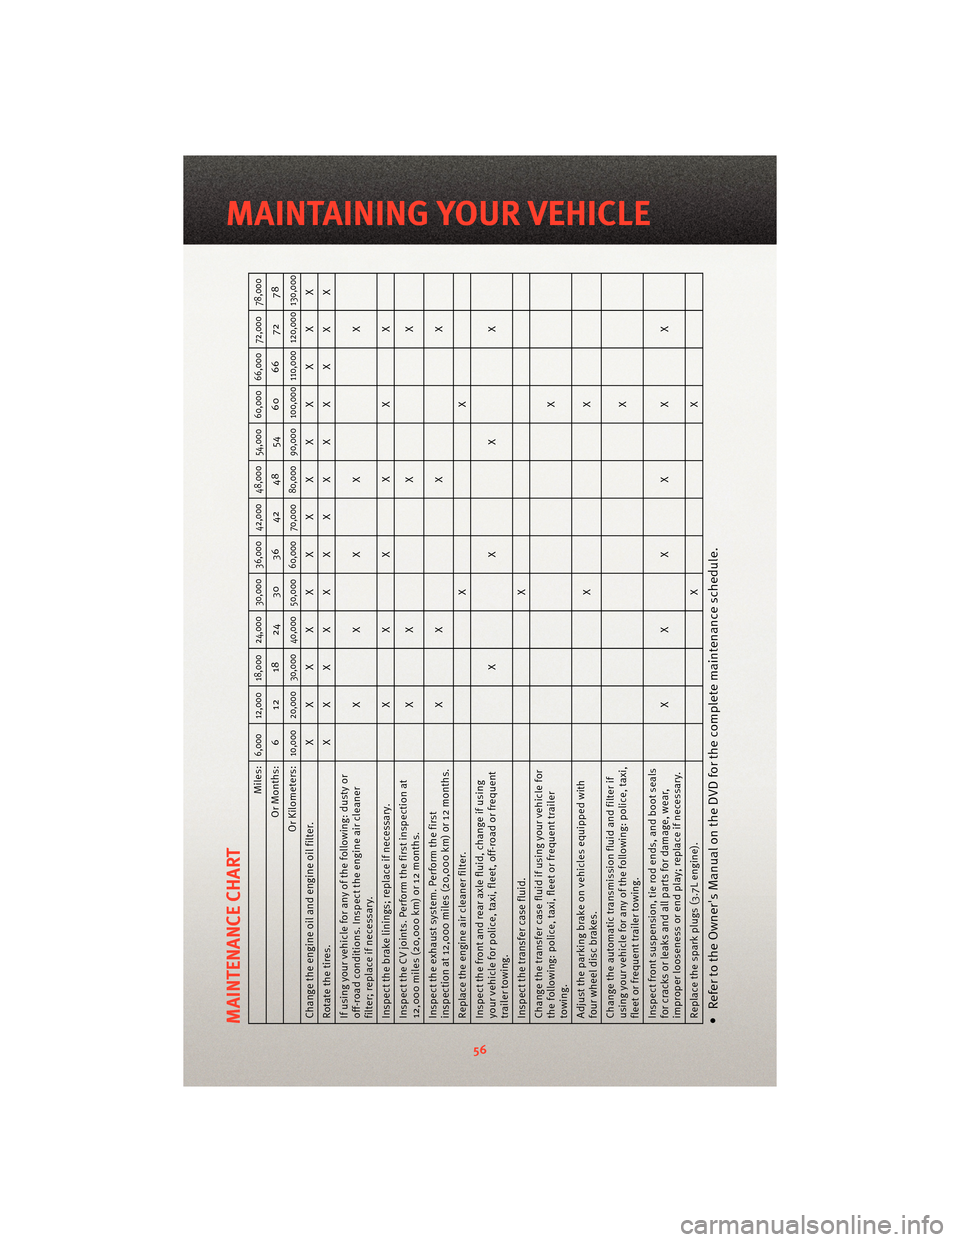 DODGE NITRO 2010 1.G User Guide MAINTENANCE CHART
Miles:
6,000 12,000 18,000 24,000 30,000 36,000 42,000 48,000 54,000 60,000 66,000 72,000 78,000
Or Months: 6 12 18 24 30 36 42 48 54 60 66 72 78
Or Kilometers:
10,000 20,000 30,000 